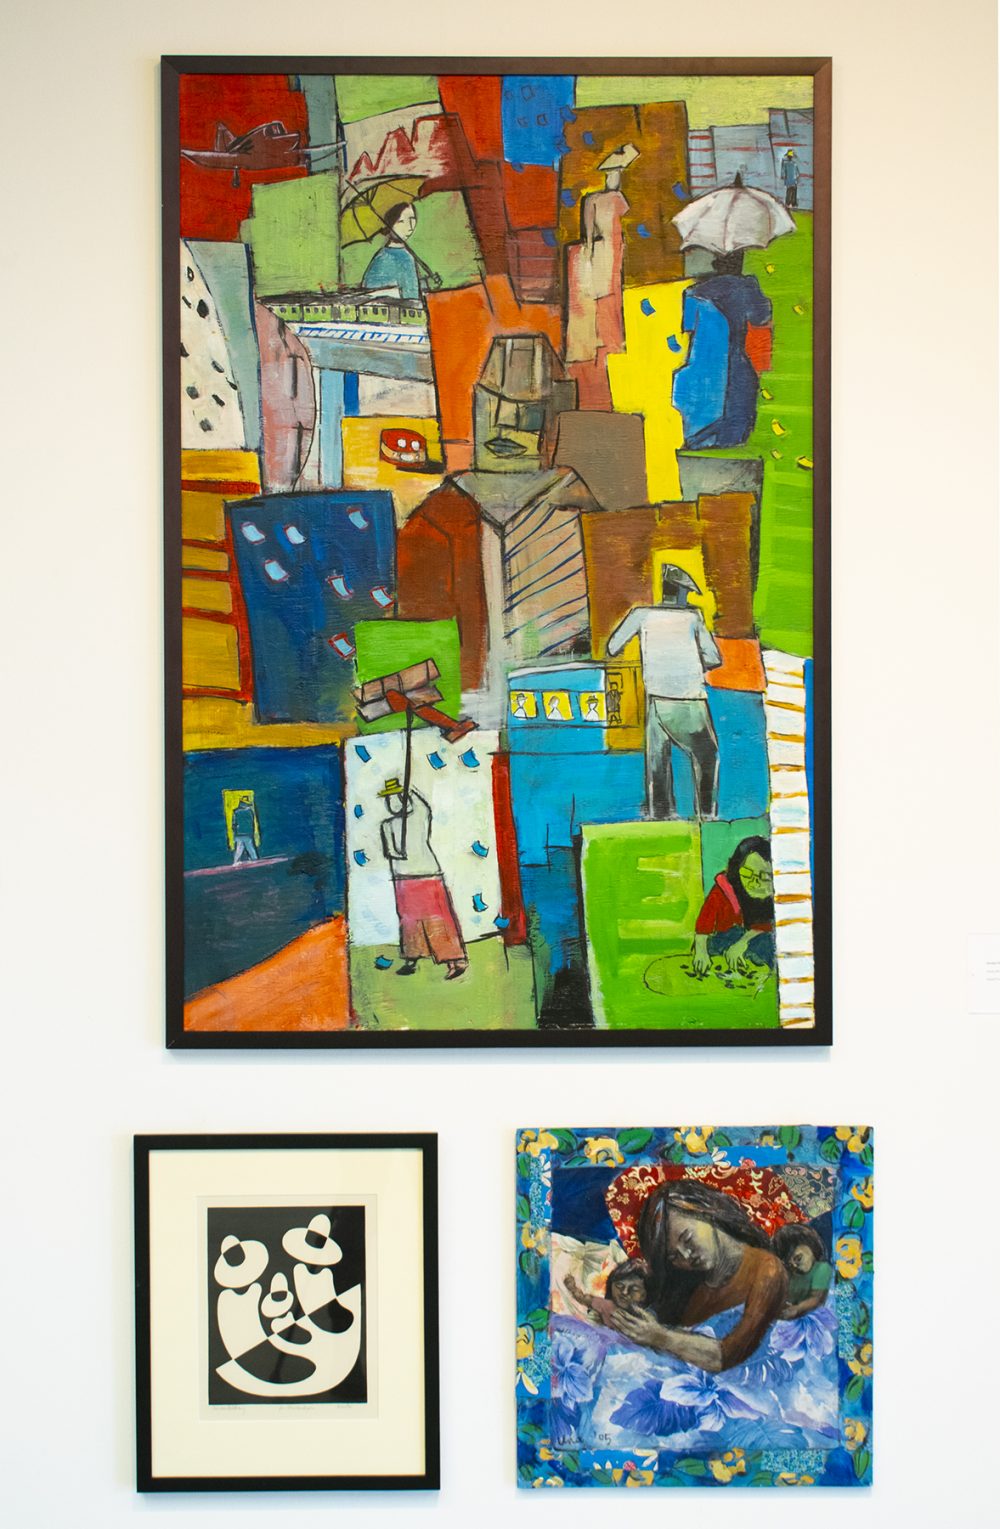 Three artworks hang on a wall. On top is a large multicolored, vertical, abstract painting depicting people in the street. On the bottom left is a small black and white print of three seated figures; on the bottom right a square painting of a woman sleeping in a bed with a child on either side of her. The painting is predominantly blue.